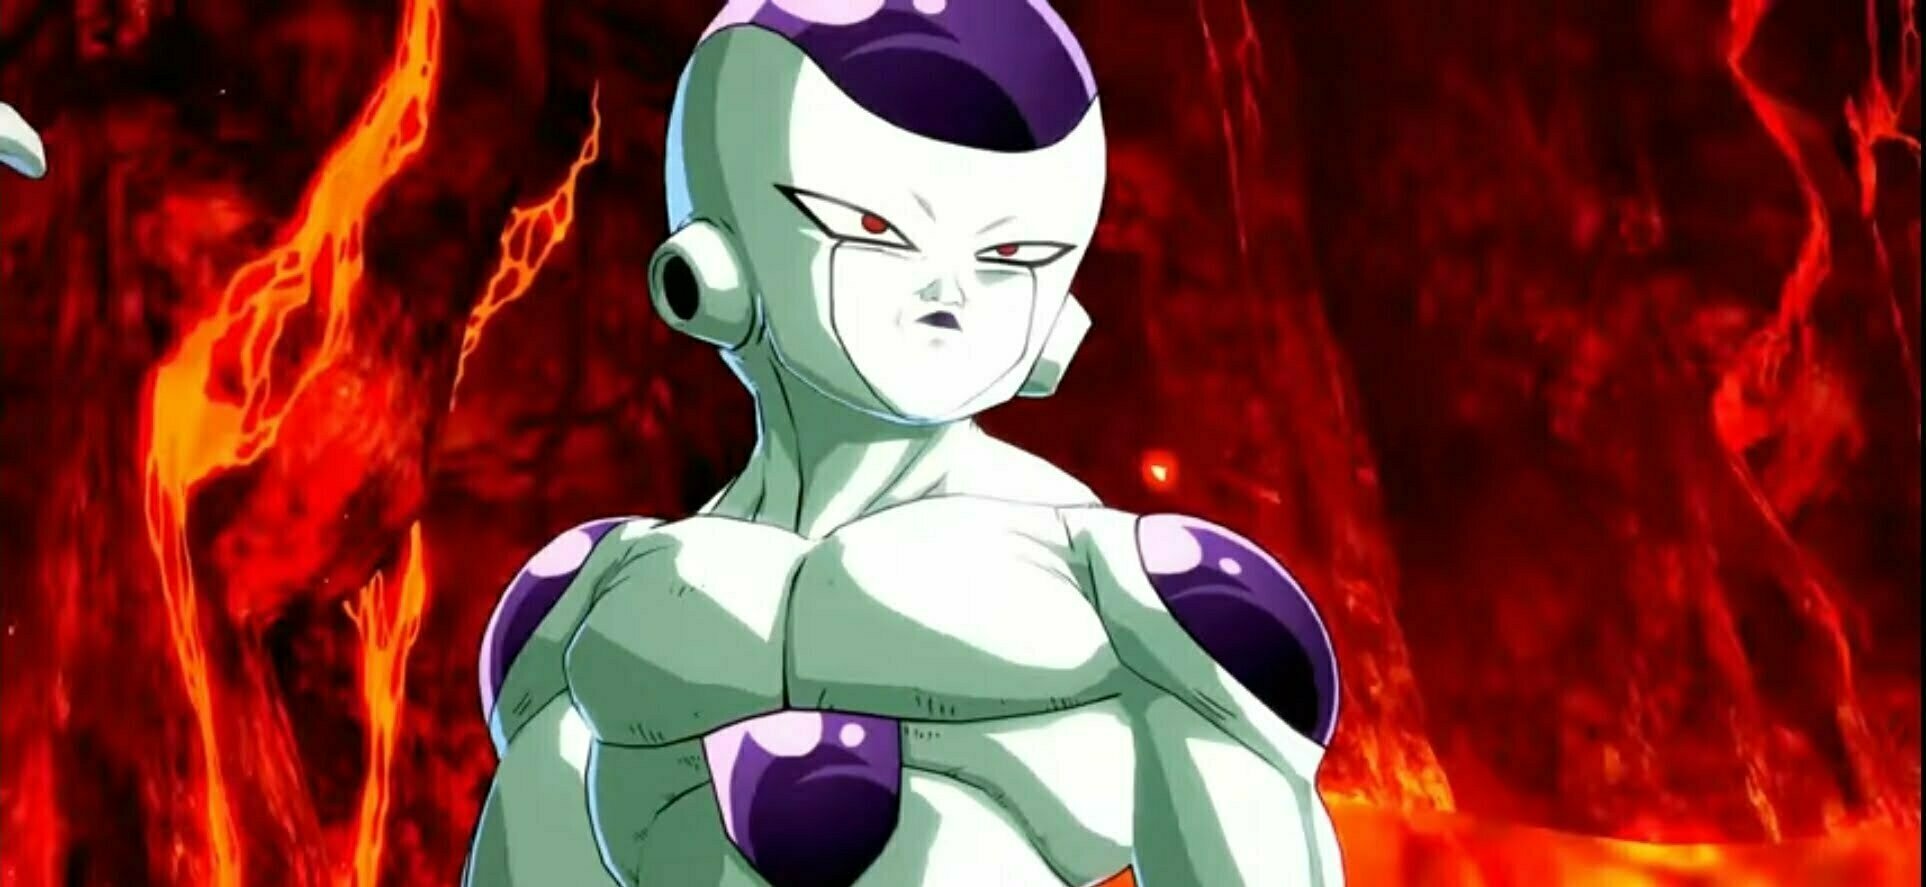  Frieza in Dragon ball fighterz A tier